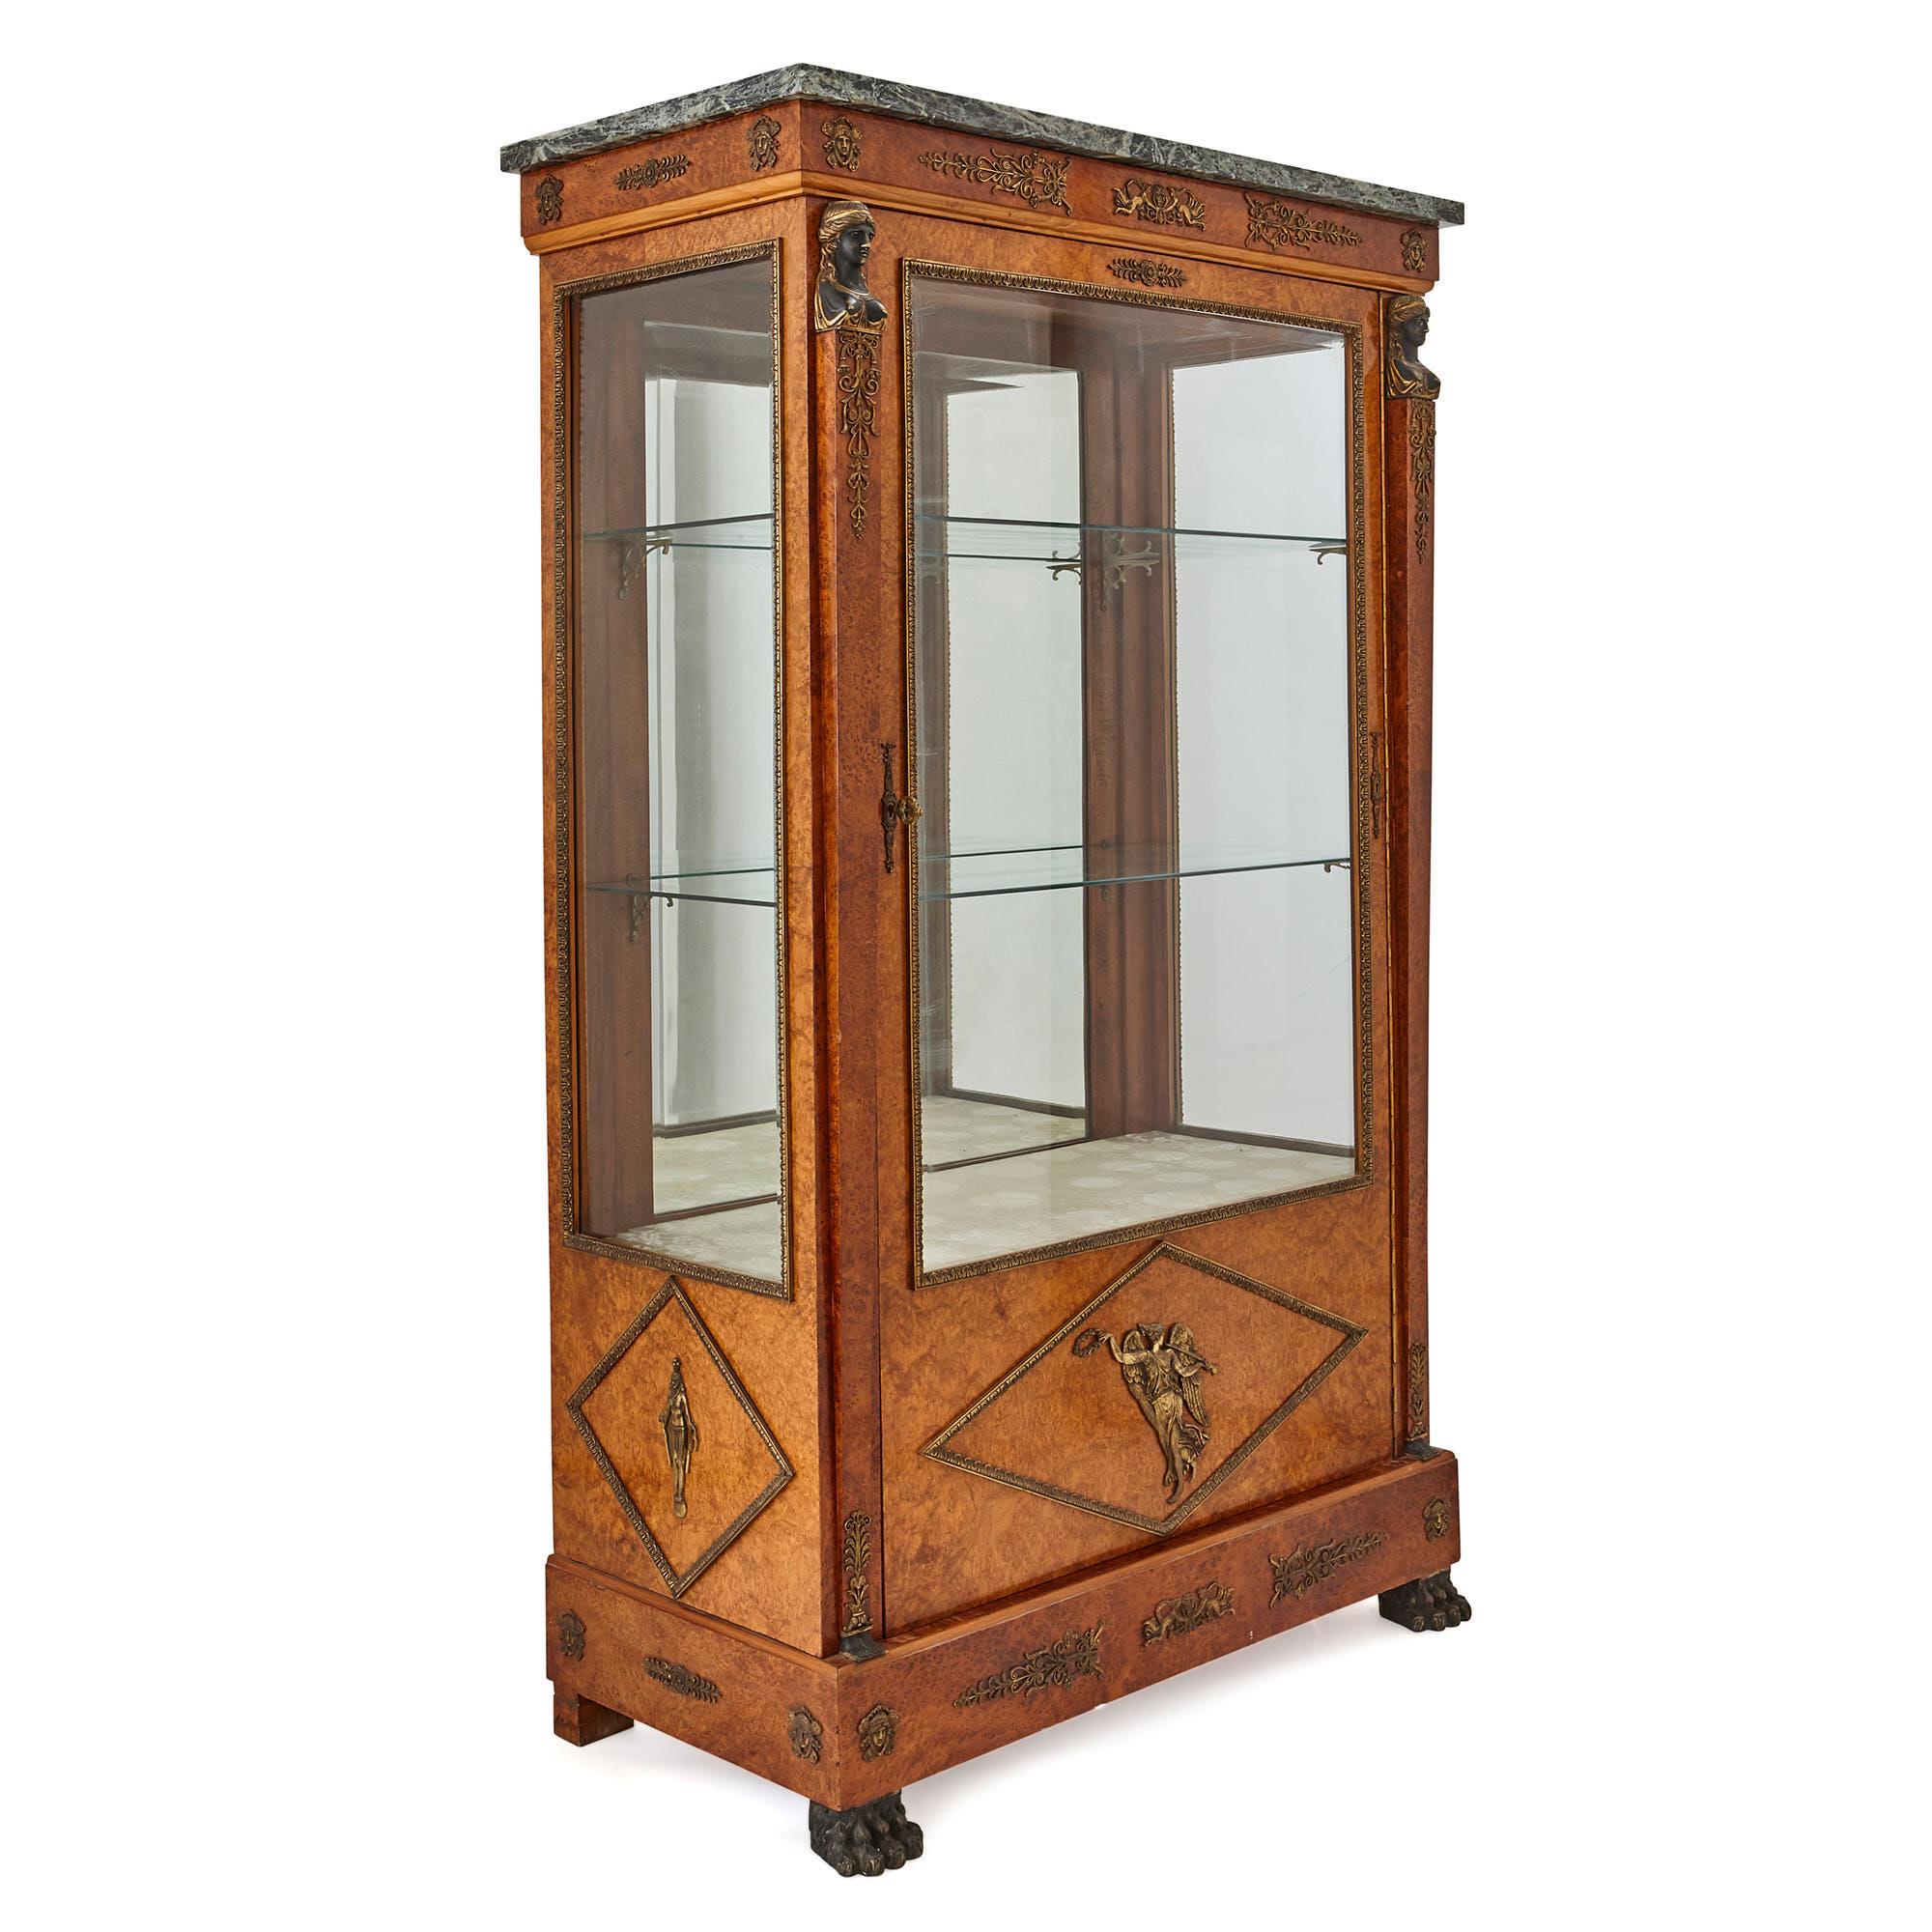 This beautiful display cabinet was crafted by the prestigious furniture company, Maison Krieger. The firm was founded in 1826 by Antoine Krieger. Over the course of the 19th century, the firm changed its name several times, but it remained within